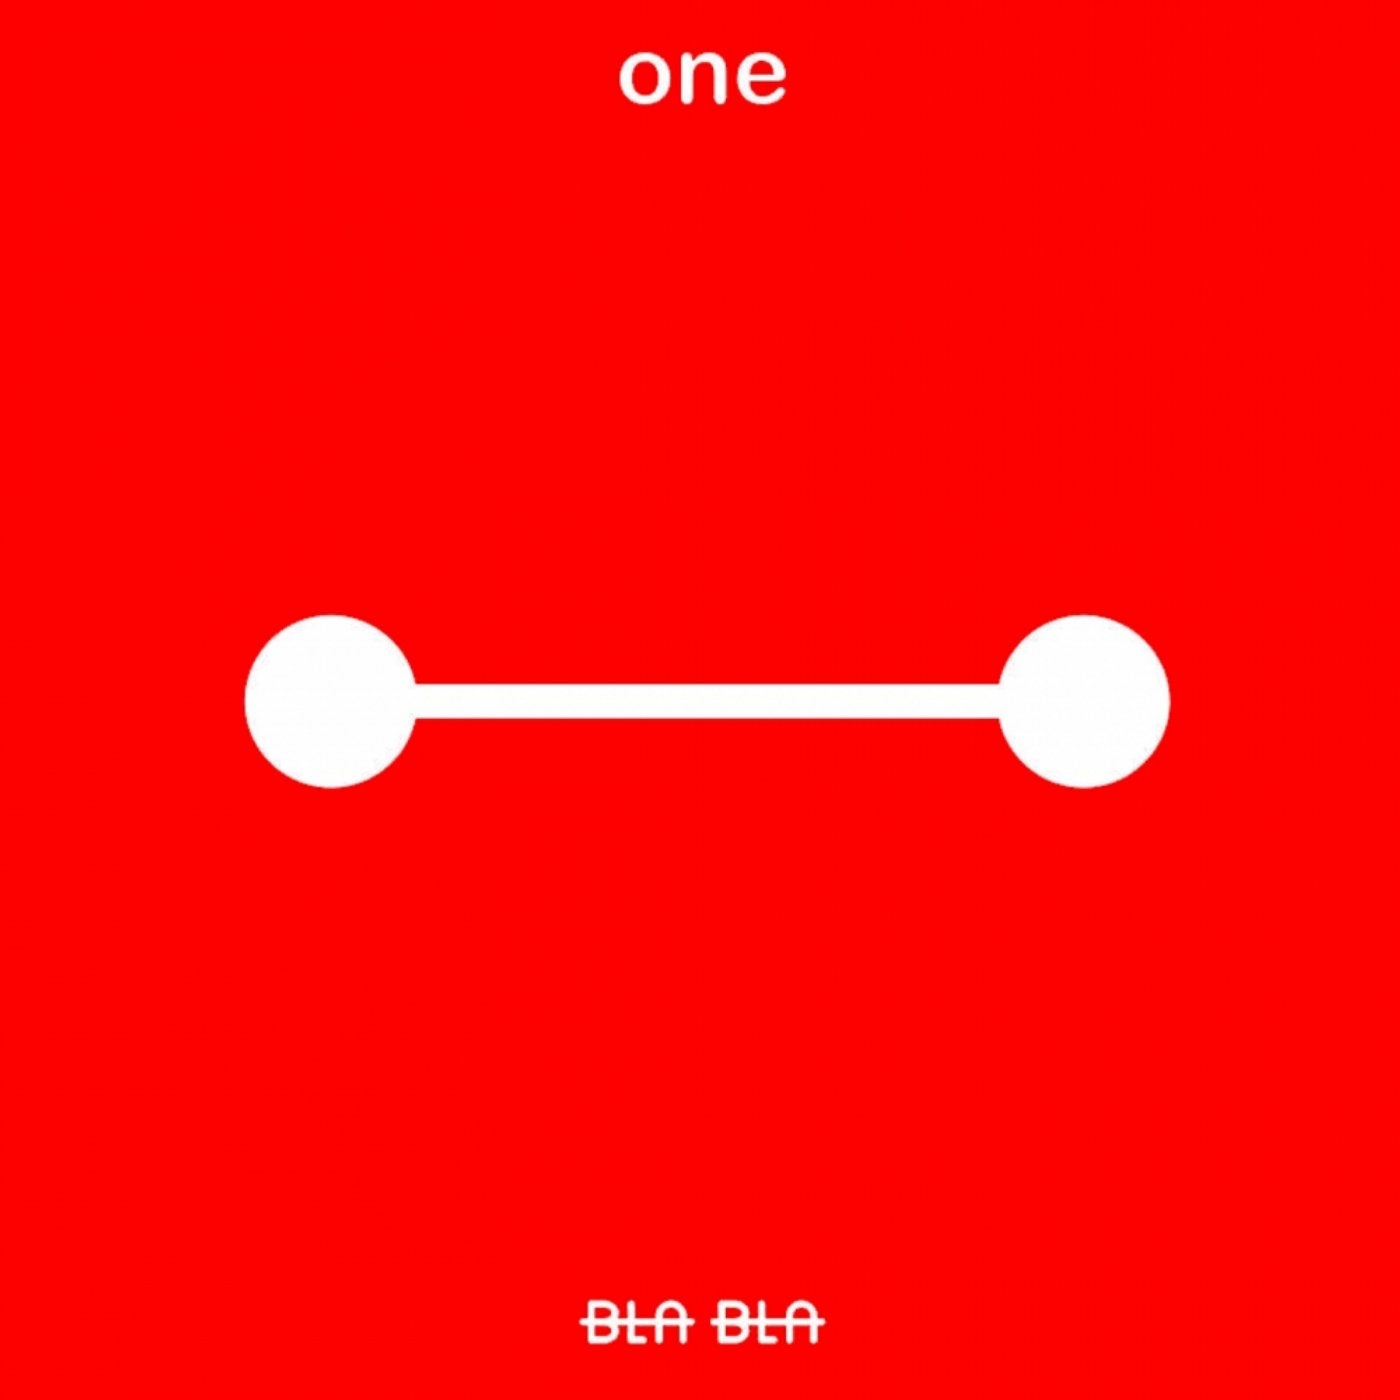 One [Seriouso]